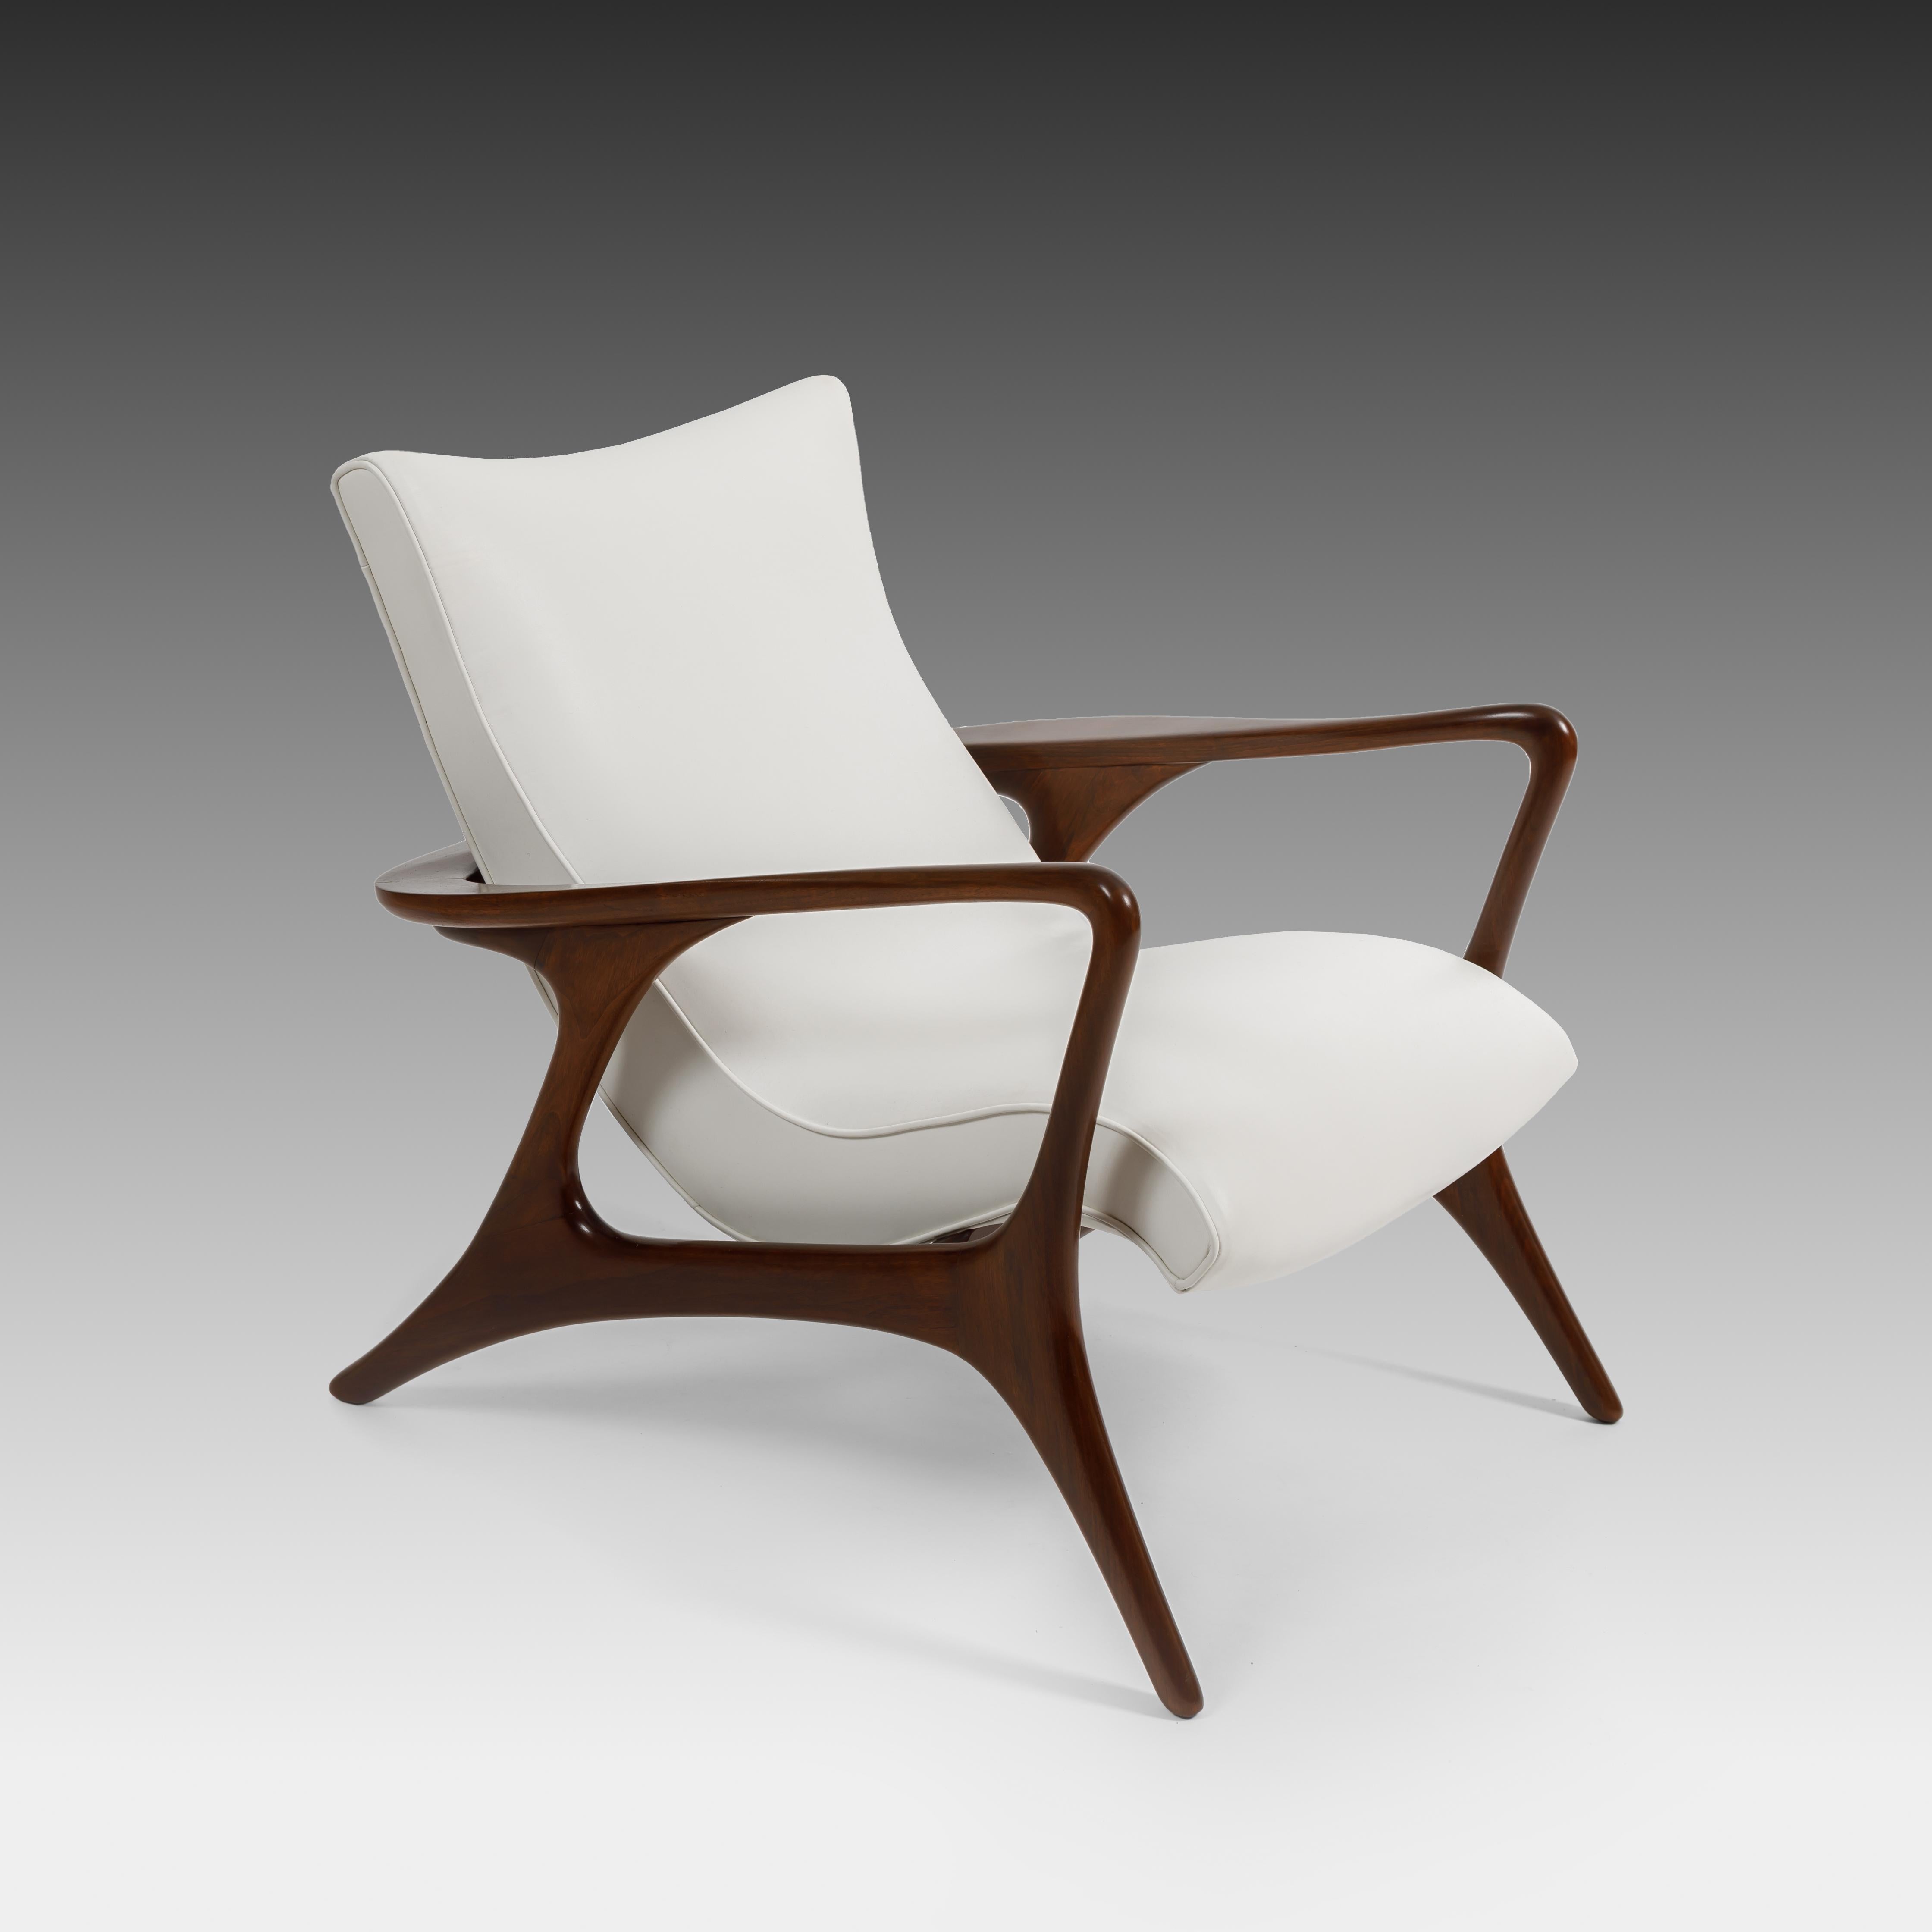 Early Vladimir Kagan for Kagan-Dreyfuss Inc. sculptural 'Contour' low back lounge chair in walnut frame and white leather upholstered padded seat, USA, 1950s.  This hallmark Kagan ergonomic design is meticulously crafted with sweeping lines and